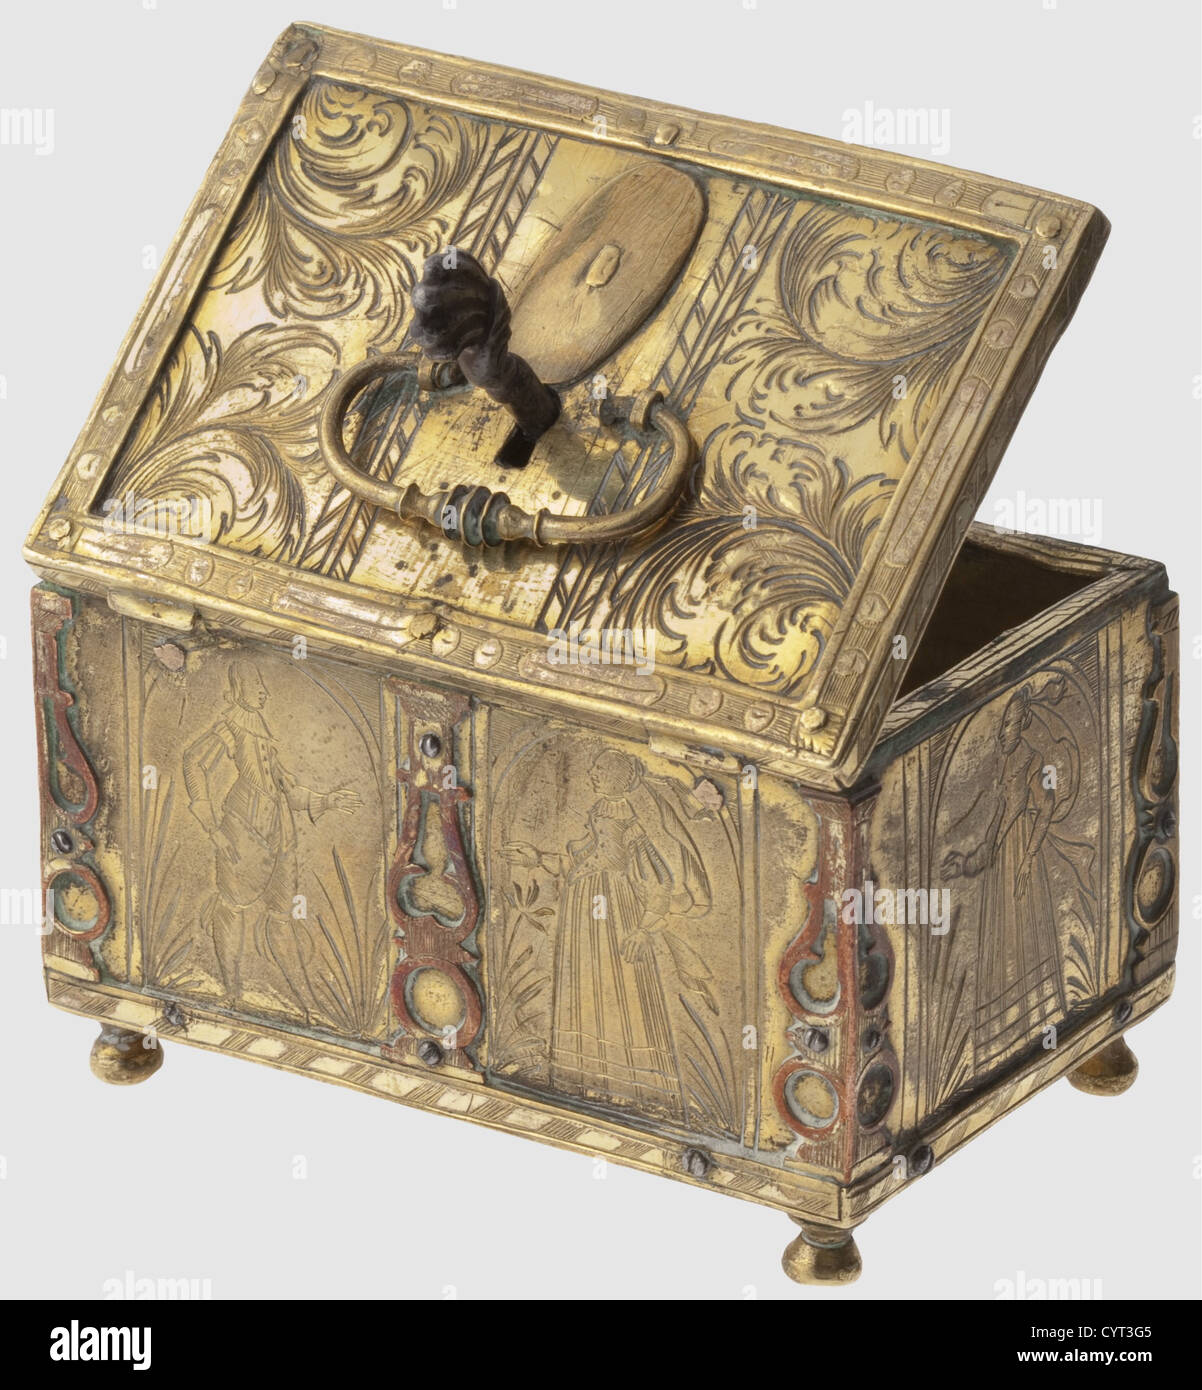 A miniature casket by Michel Mann,Nuremberg,around 1610 Rectangular fire-gilded brass body on four spherical feet.Hinged lid with a moveable carrying handle.Mechanism with a domed lock housing and gilded decorative overlay.Four latches.Finely engraved decorative figures in late Renaissance townsfolk attire.There is a leaping hound engraved on the bottom.The interior has a standing nobleman,under the stamped signature,'MM'.Gilding worn.There is a later oval brass plate riveted to the lid.Dimensions 4.5 x 7.5 x 5 cm,historic,historical,,17th centu,Additional-Rights-Clearences-Not Available Stock Photo